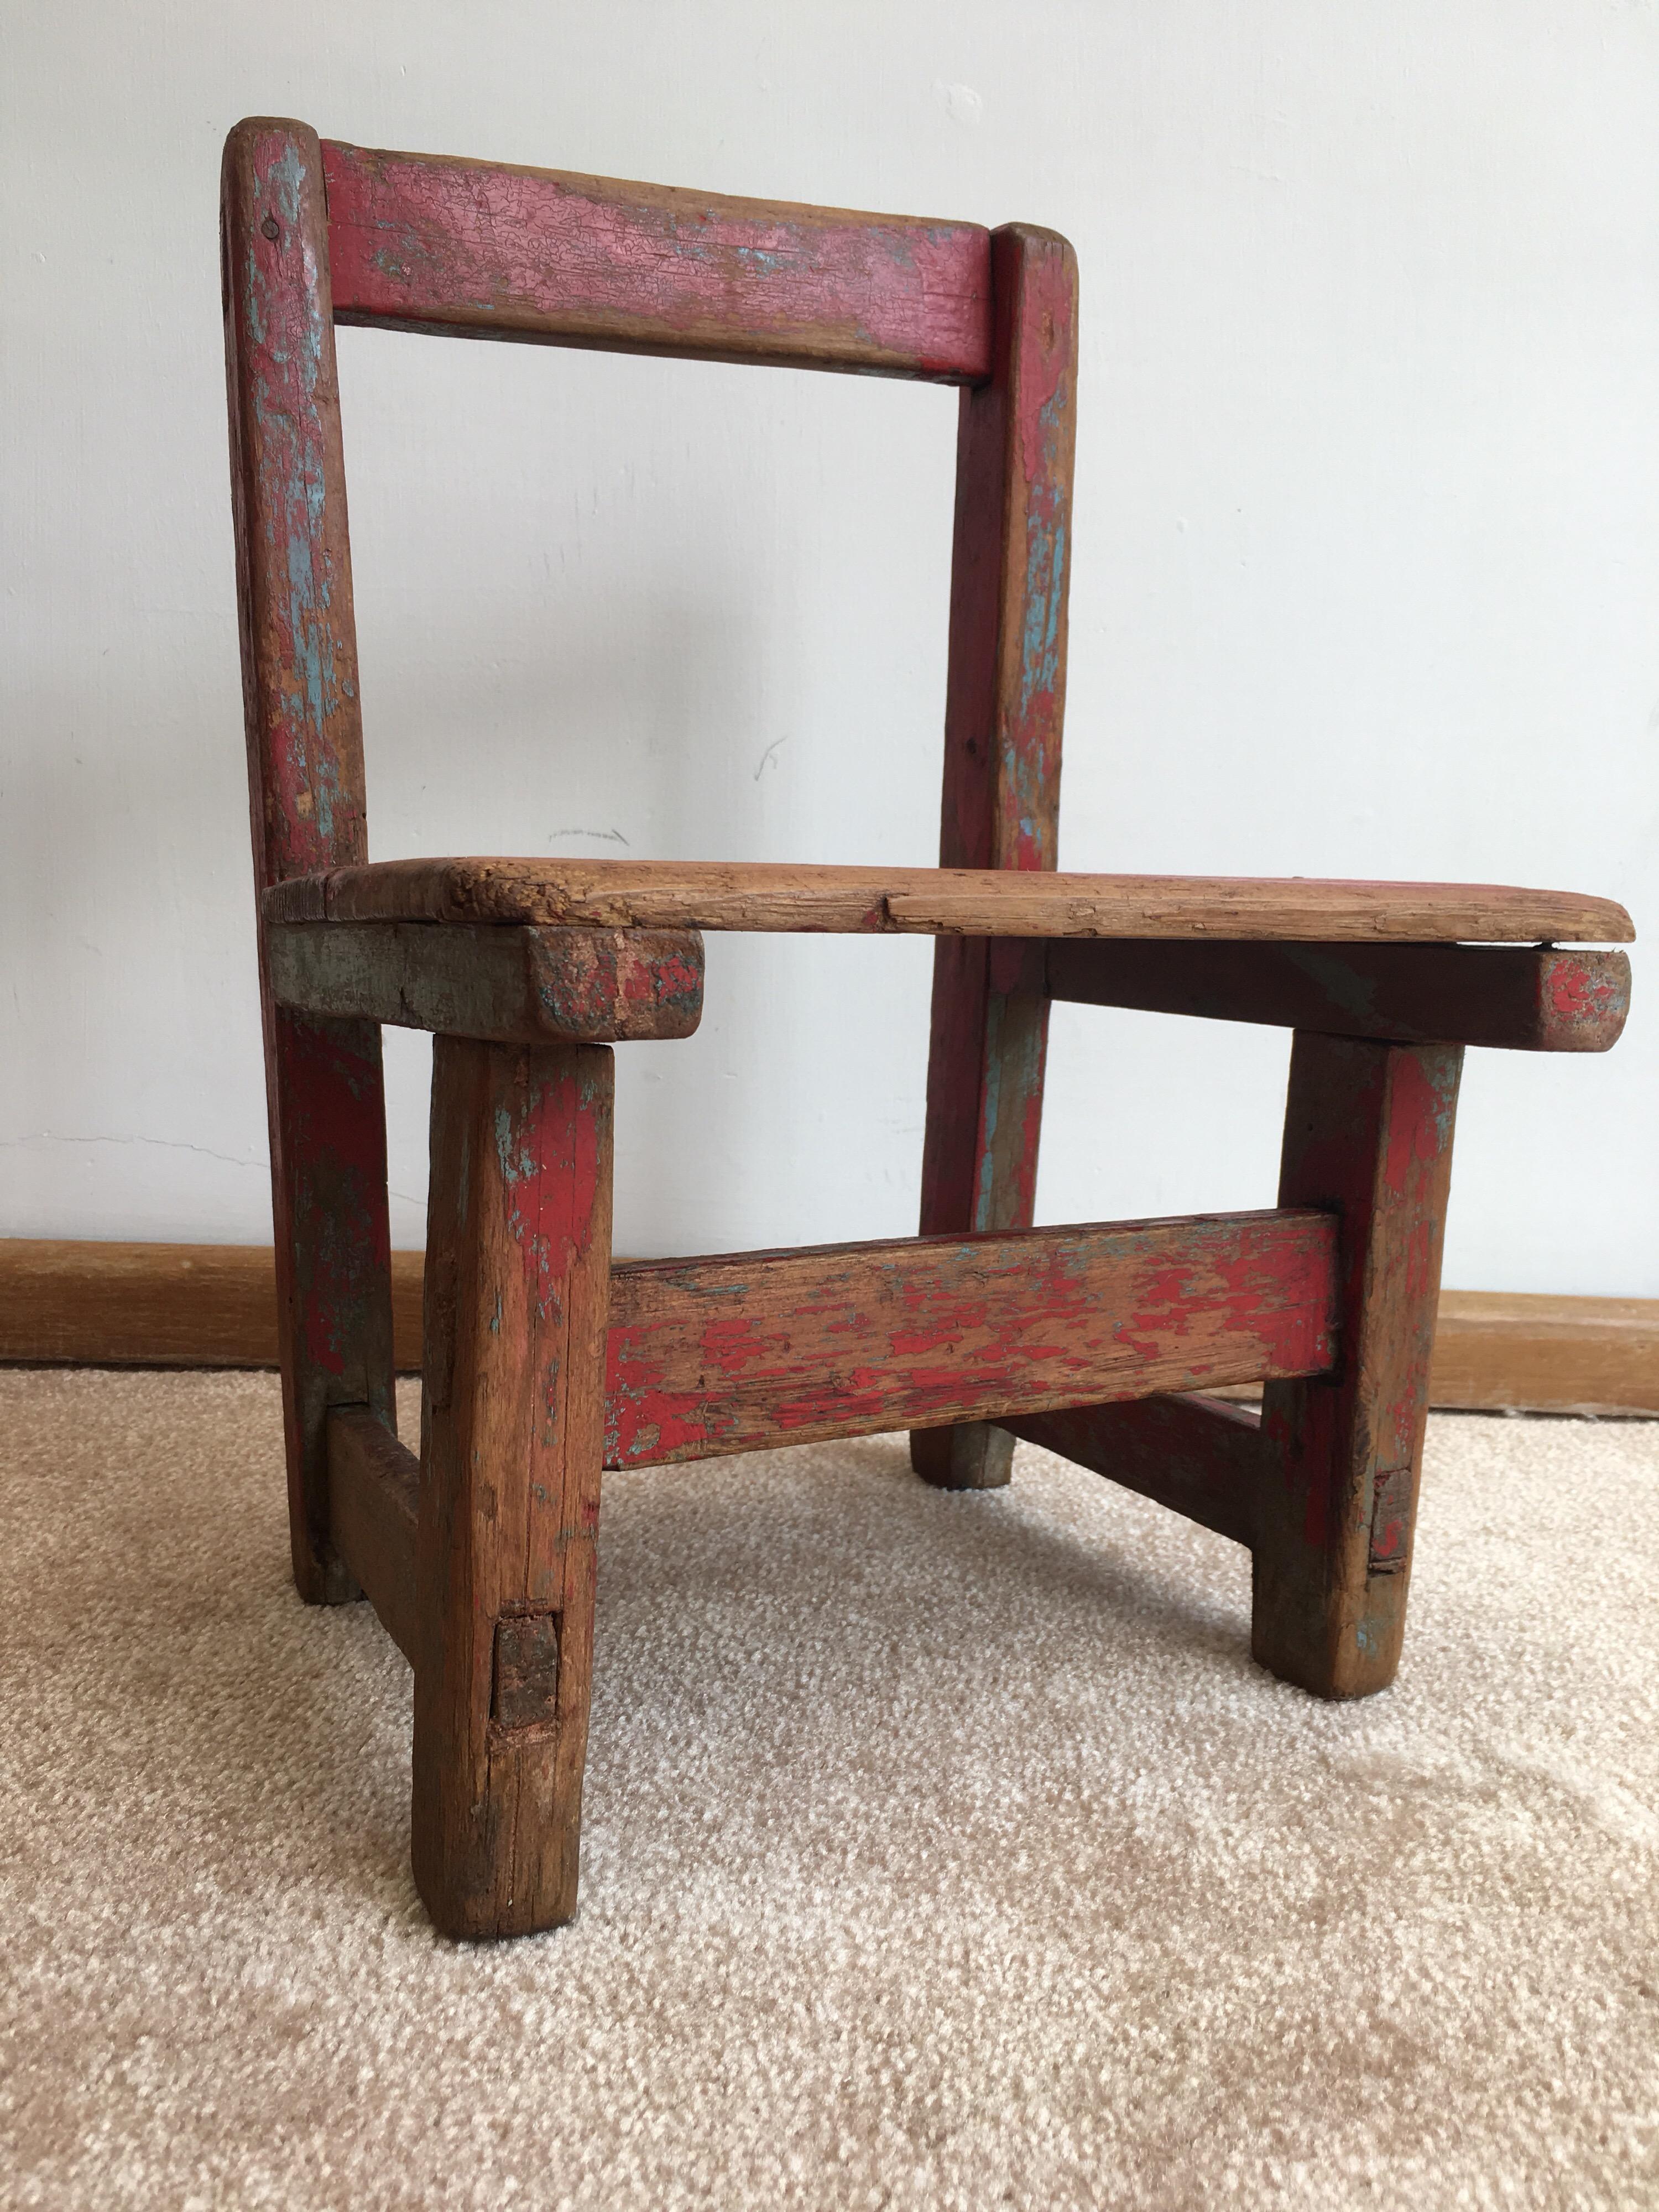 Rustic wooden chair from Oaxaca with original paint, circa 1960s. Made for a small child.